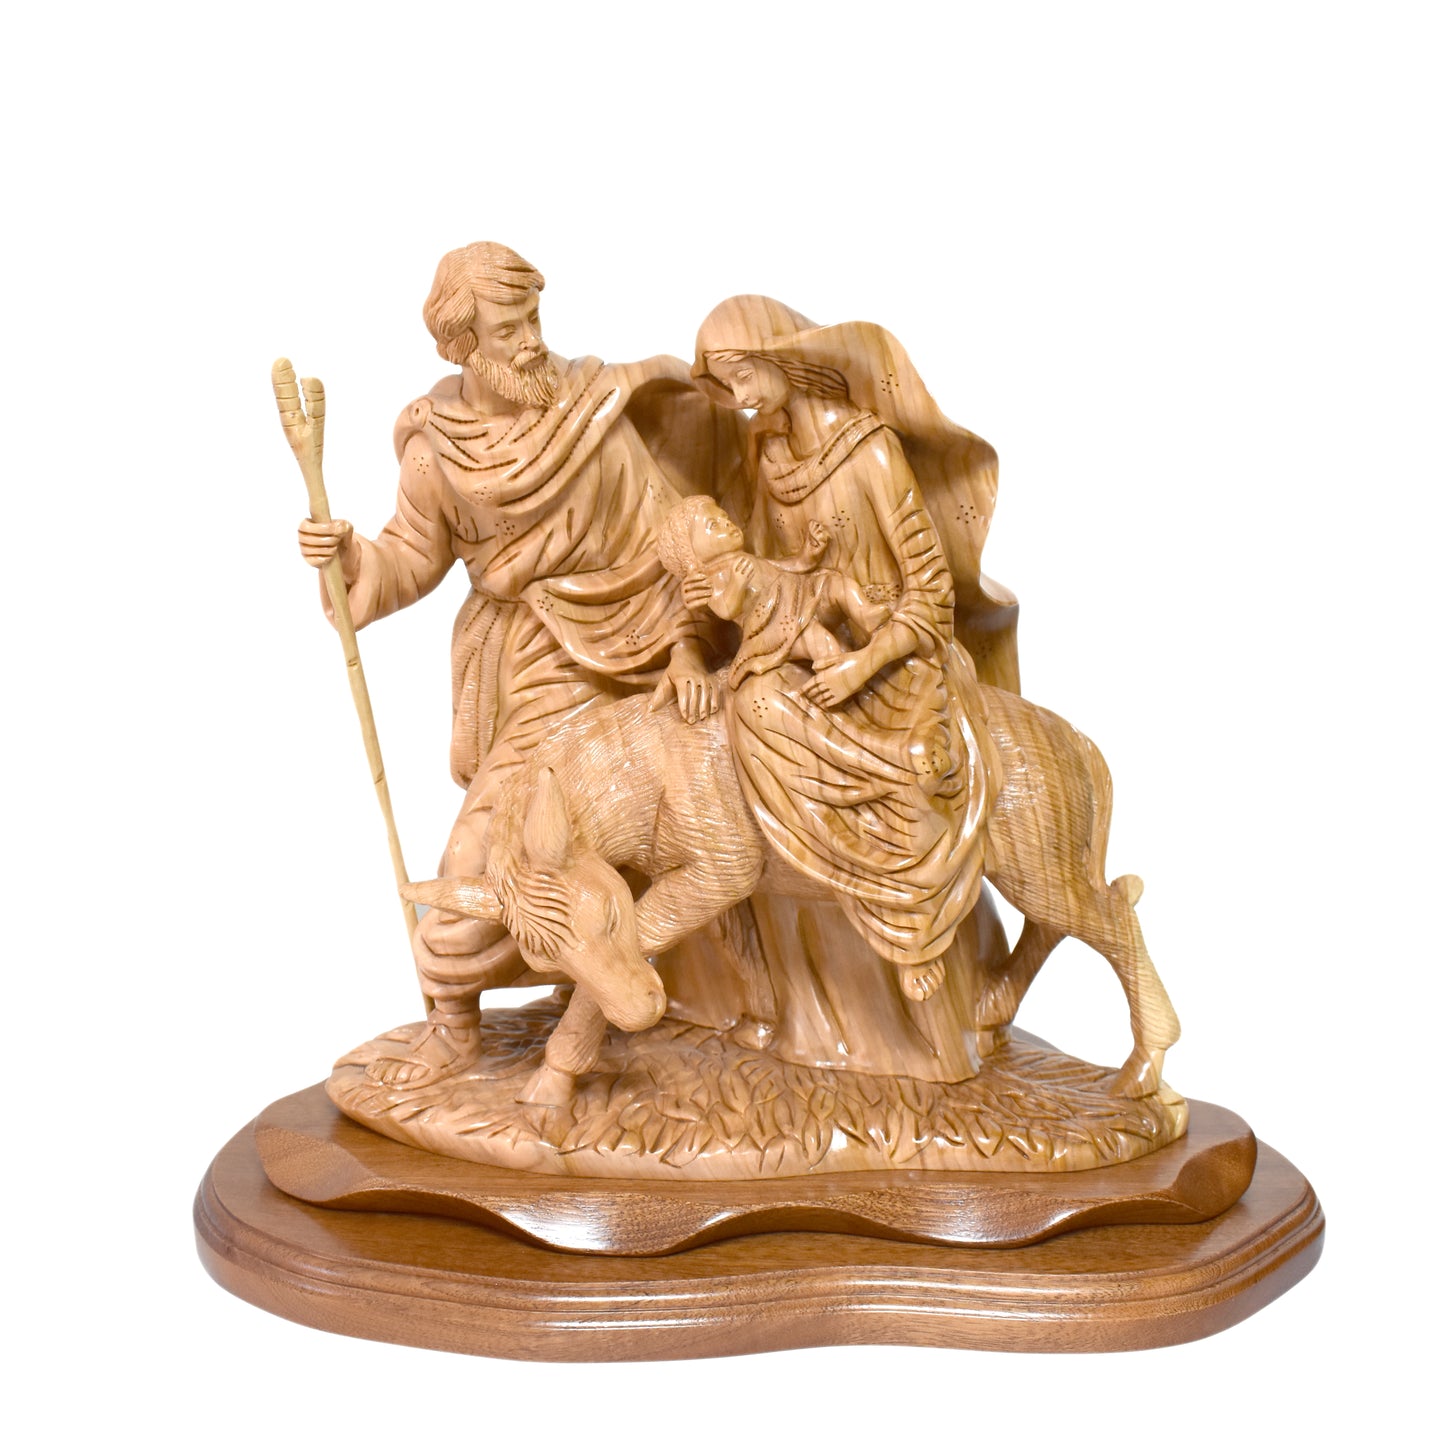 "The Flight into Egypt" St. Joesph with Virgin Mary Riding Donkey, 11"  Masterpiece Olive Wood Carving Sculpture Art from the Holy Land